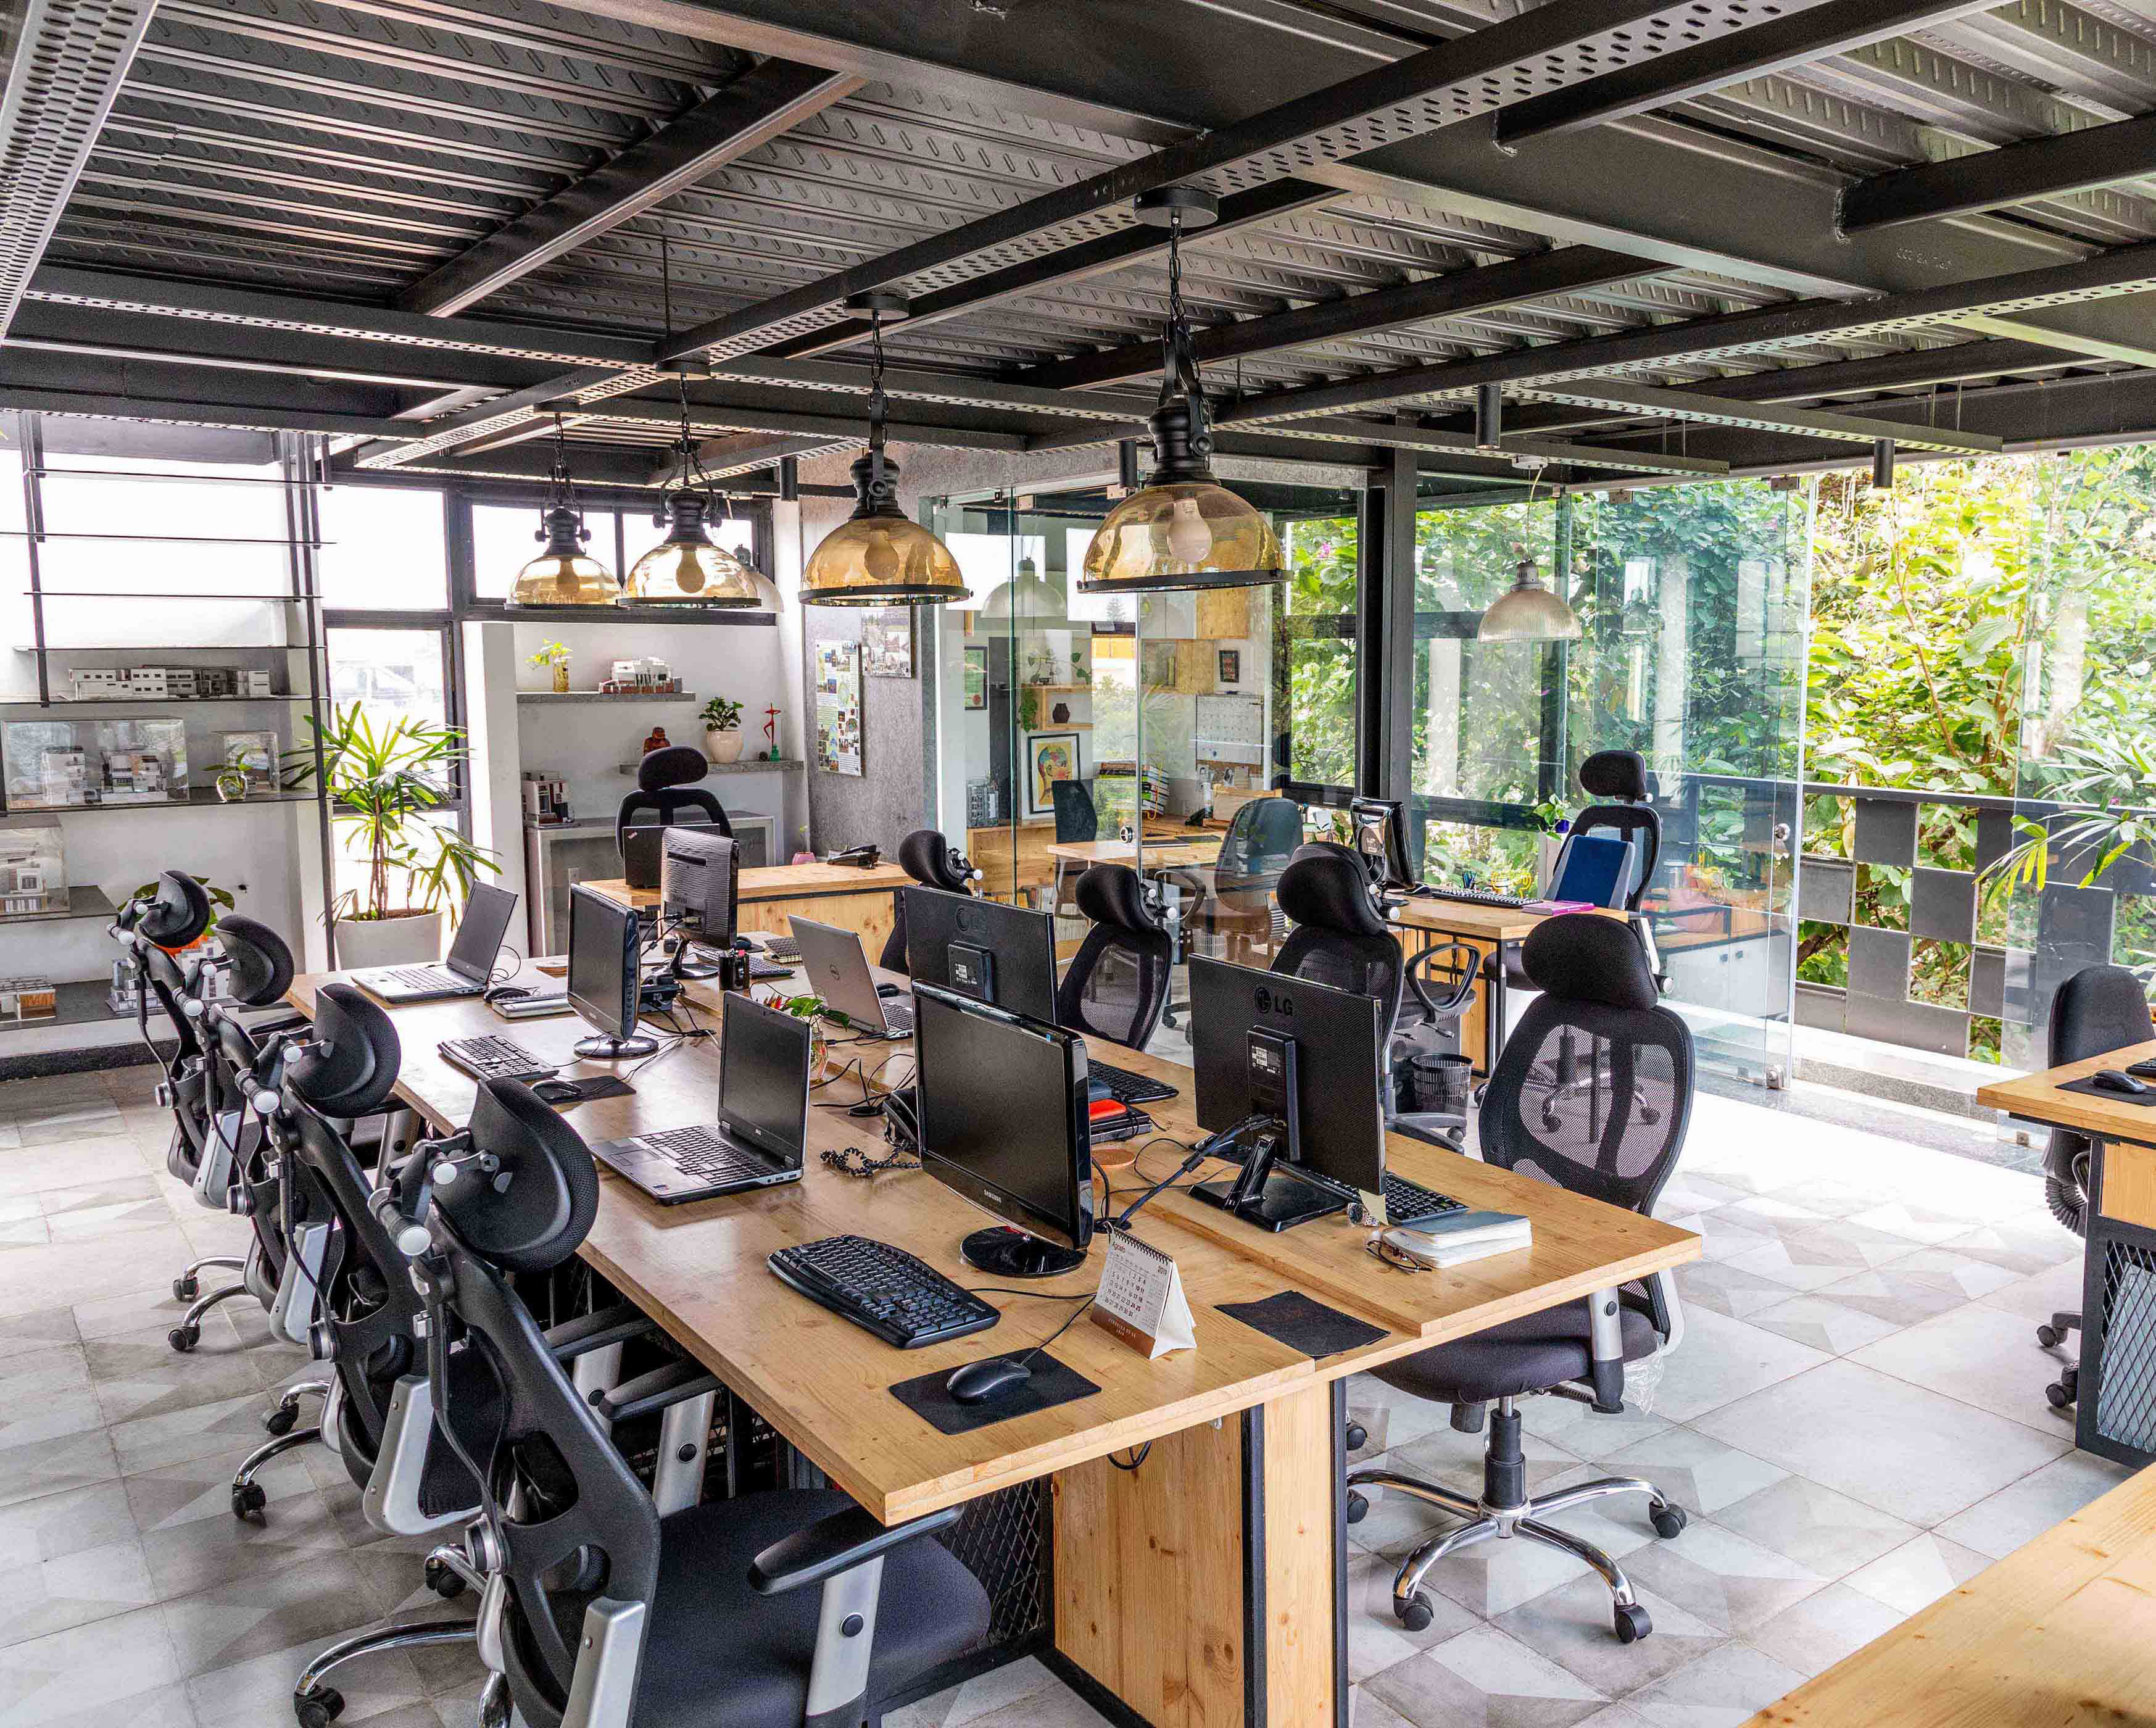 The park facing, flexible workspace has large openings that allow natural light to pour in, green elements around the office makes for an informal and stress-free work environment.